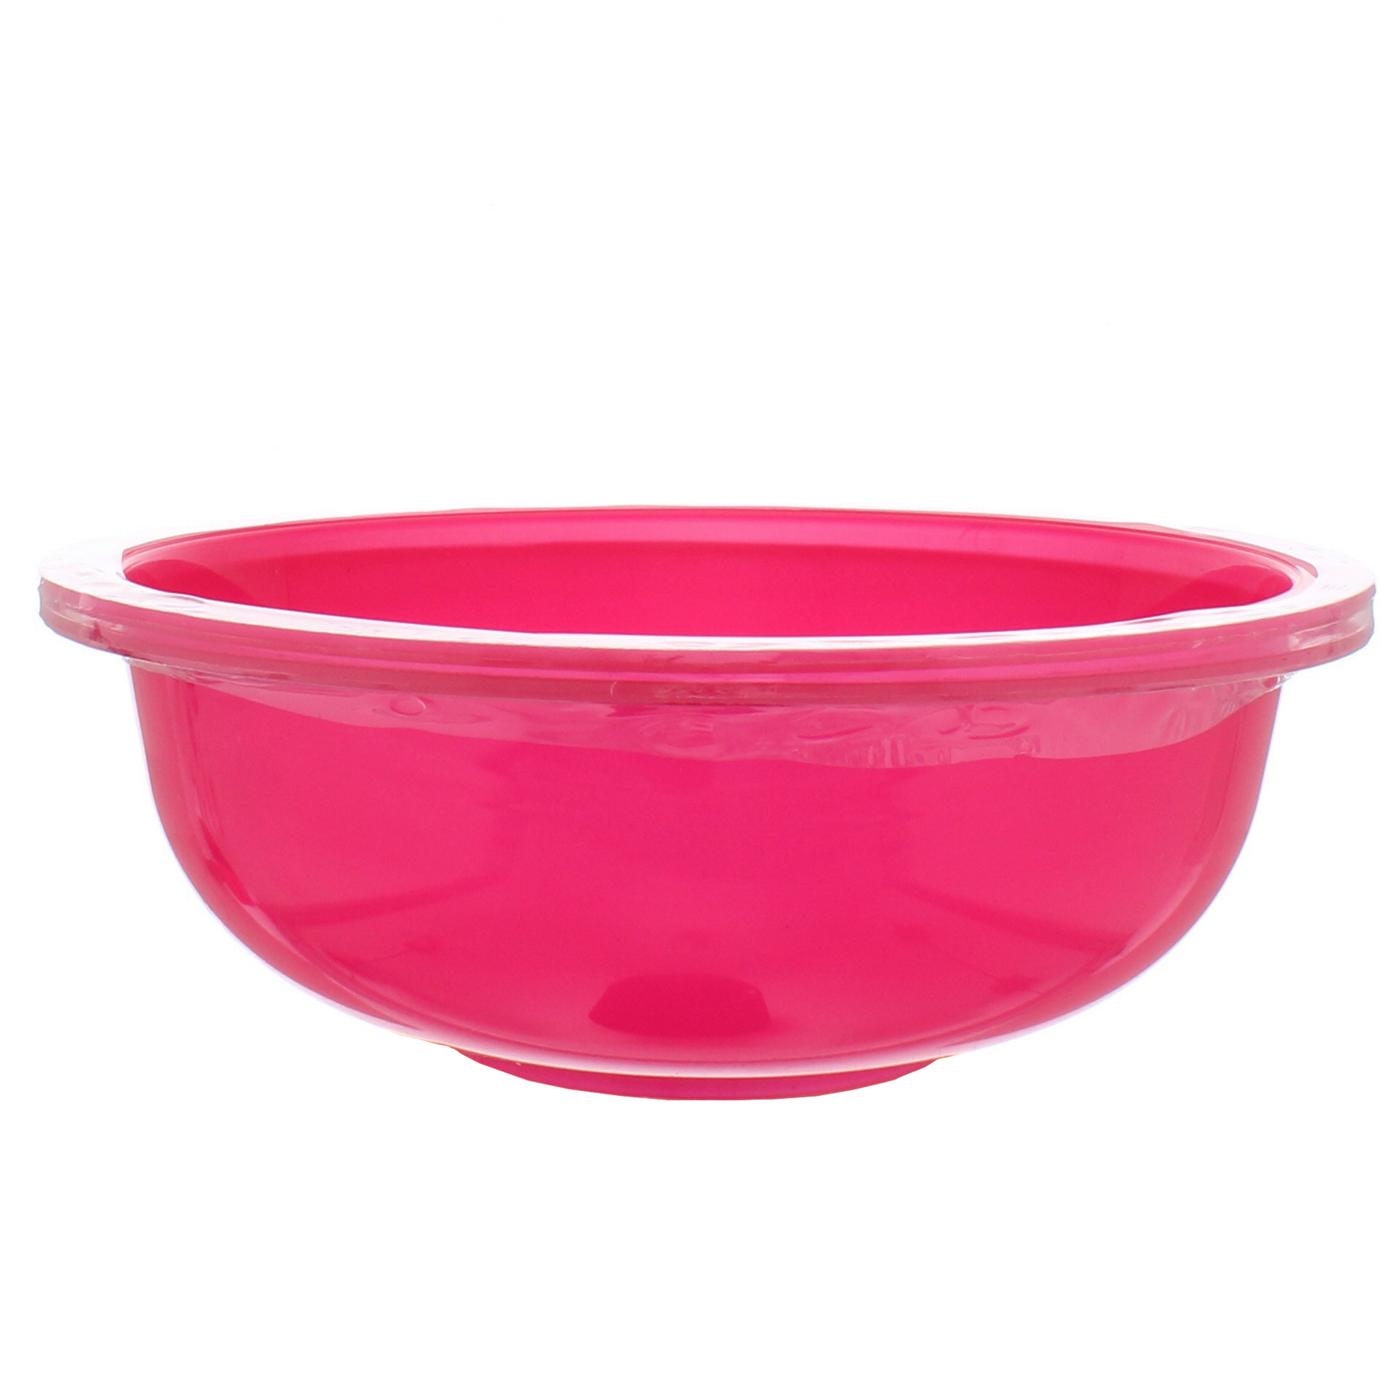 United Solutions Plastic Bowl, Pink or Green; image 1 of 2